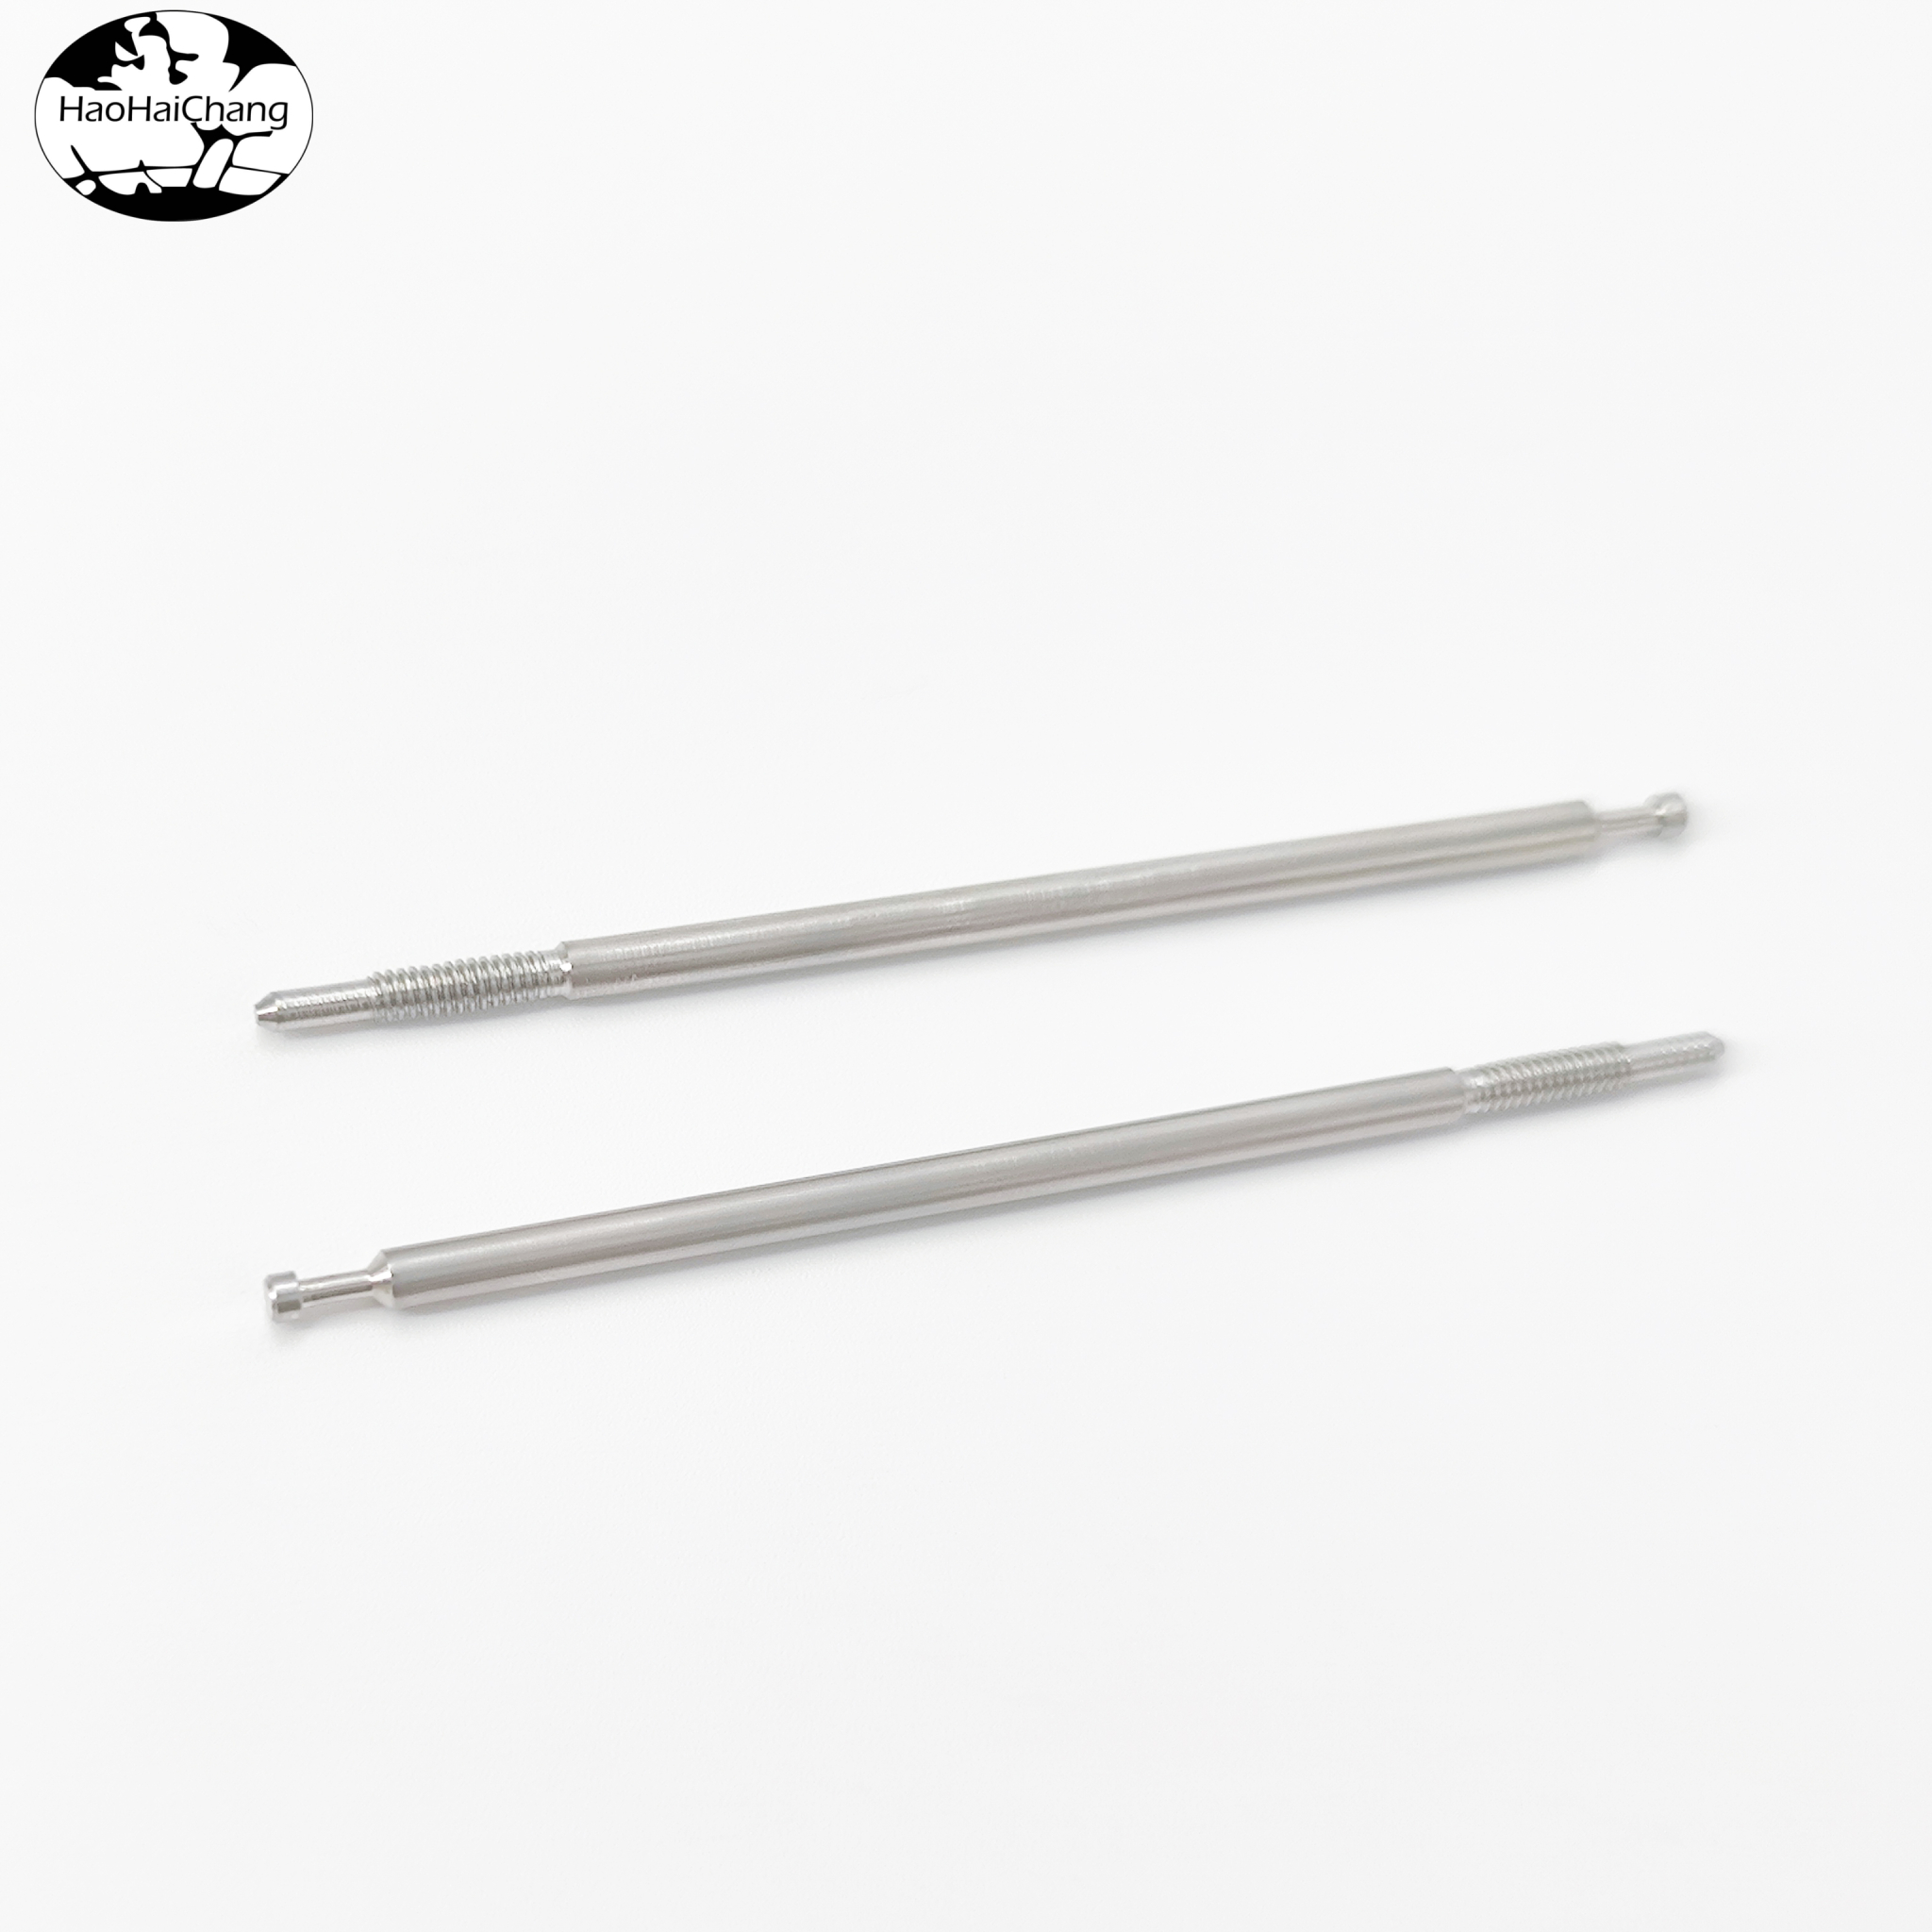 HHC-485 Stainless Steel Upper Lead Rod For Electric Heating Tube Heating Electric Heating Tube Lead Rod